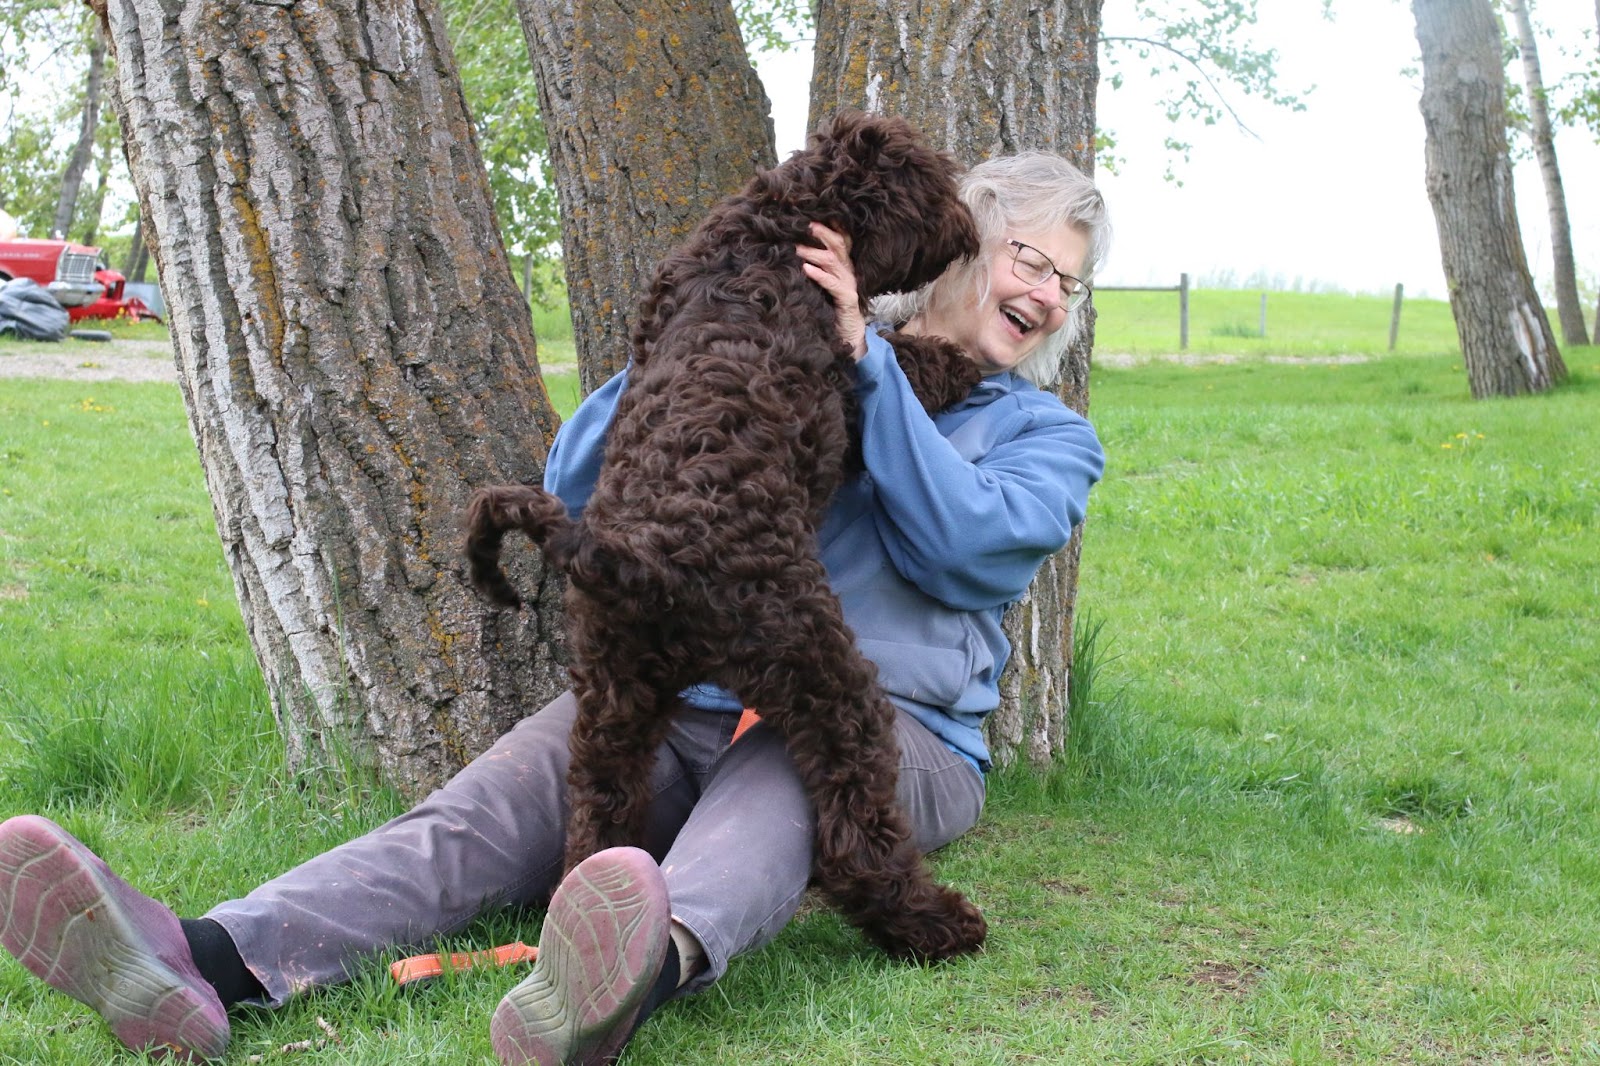 Sweet chocolate Australian Labradoodle puppy licking a woman's face and the woman is laughing